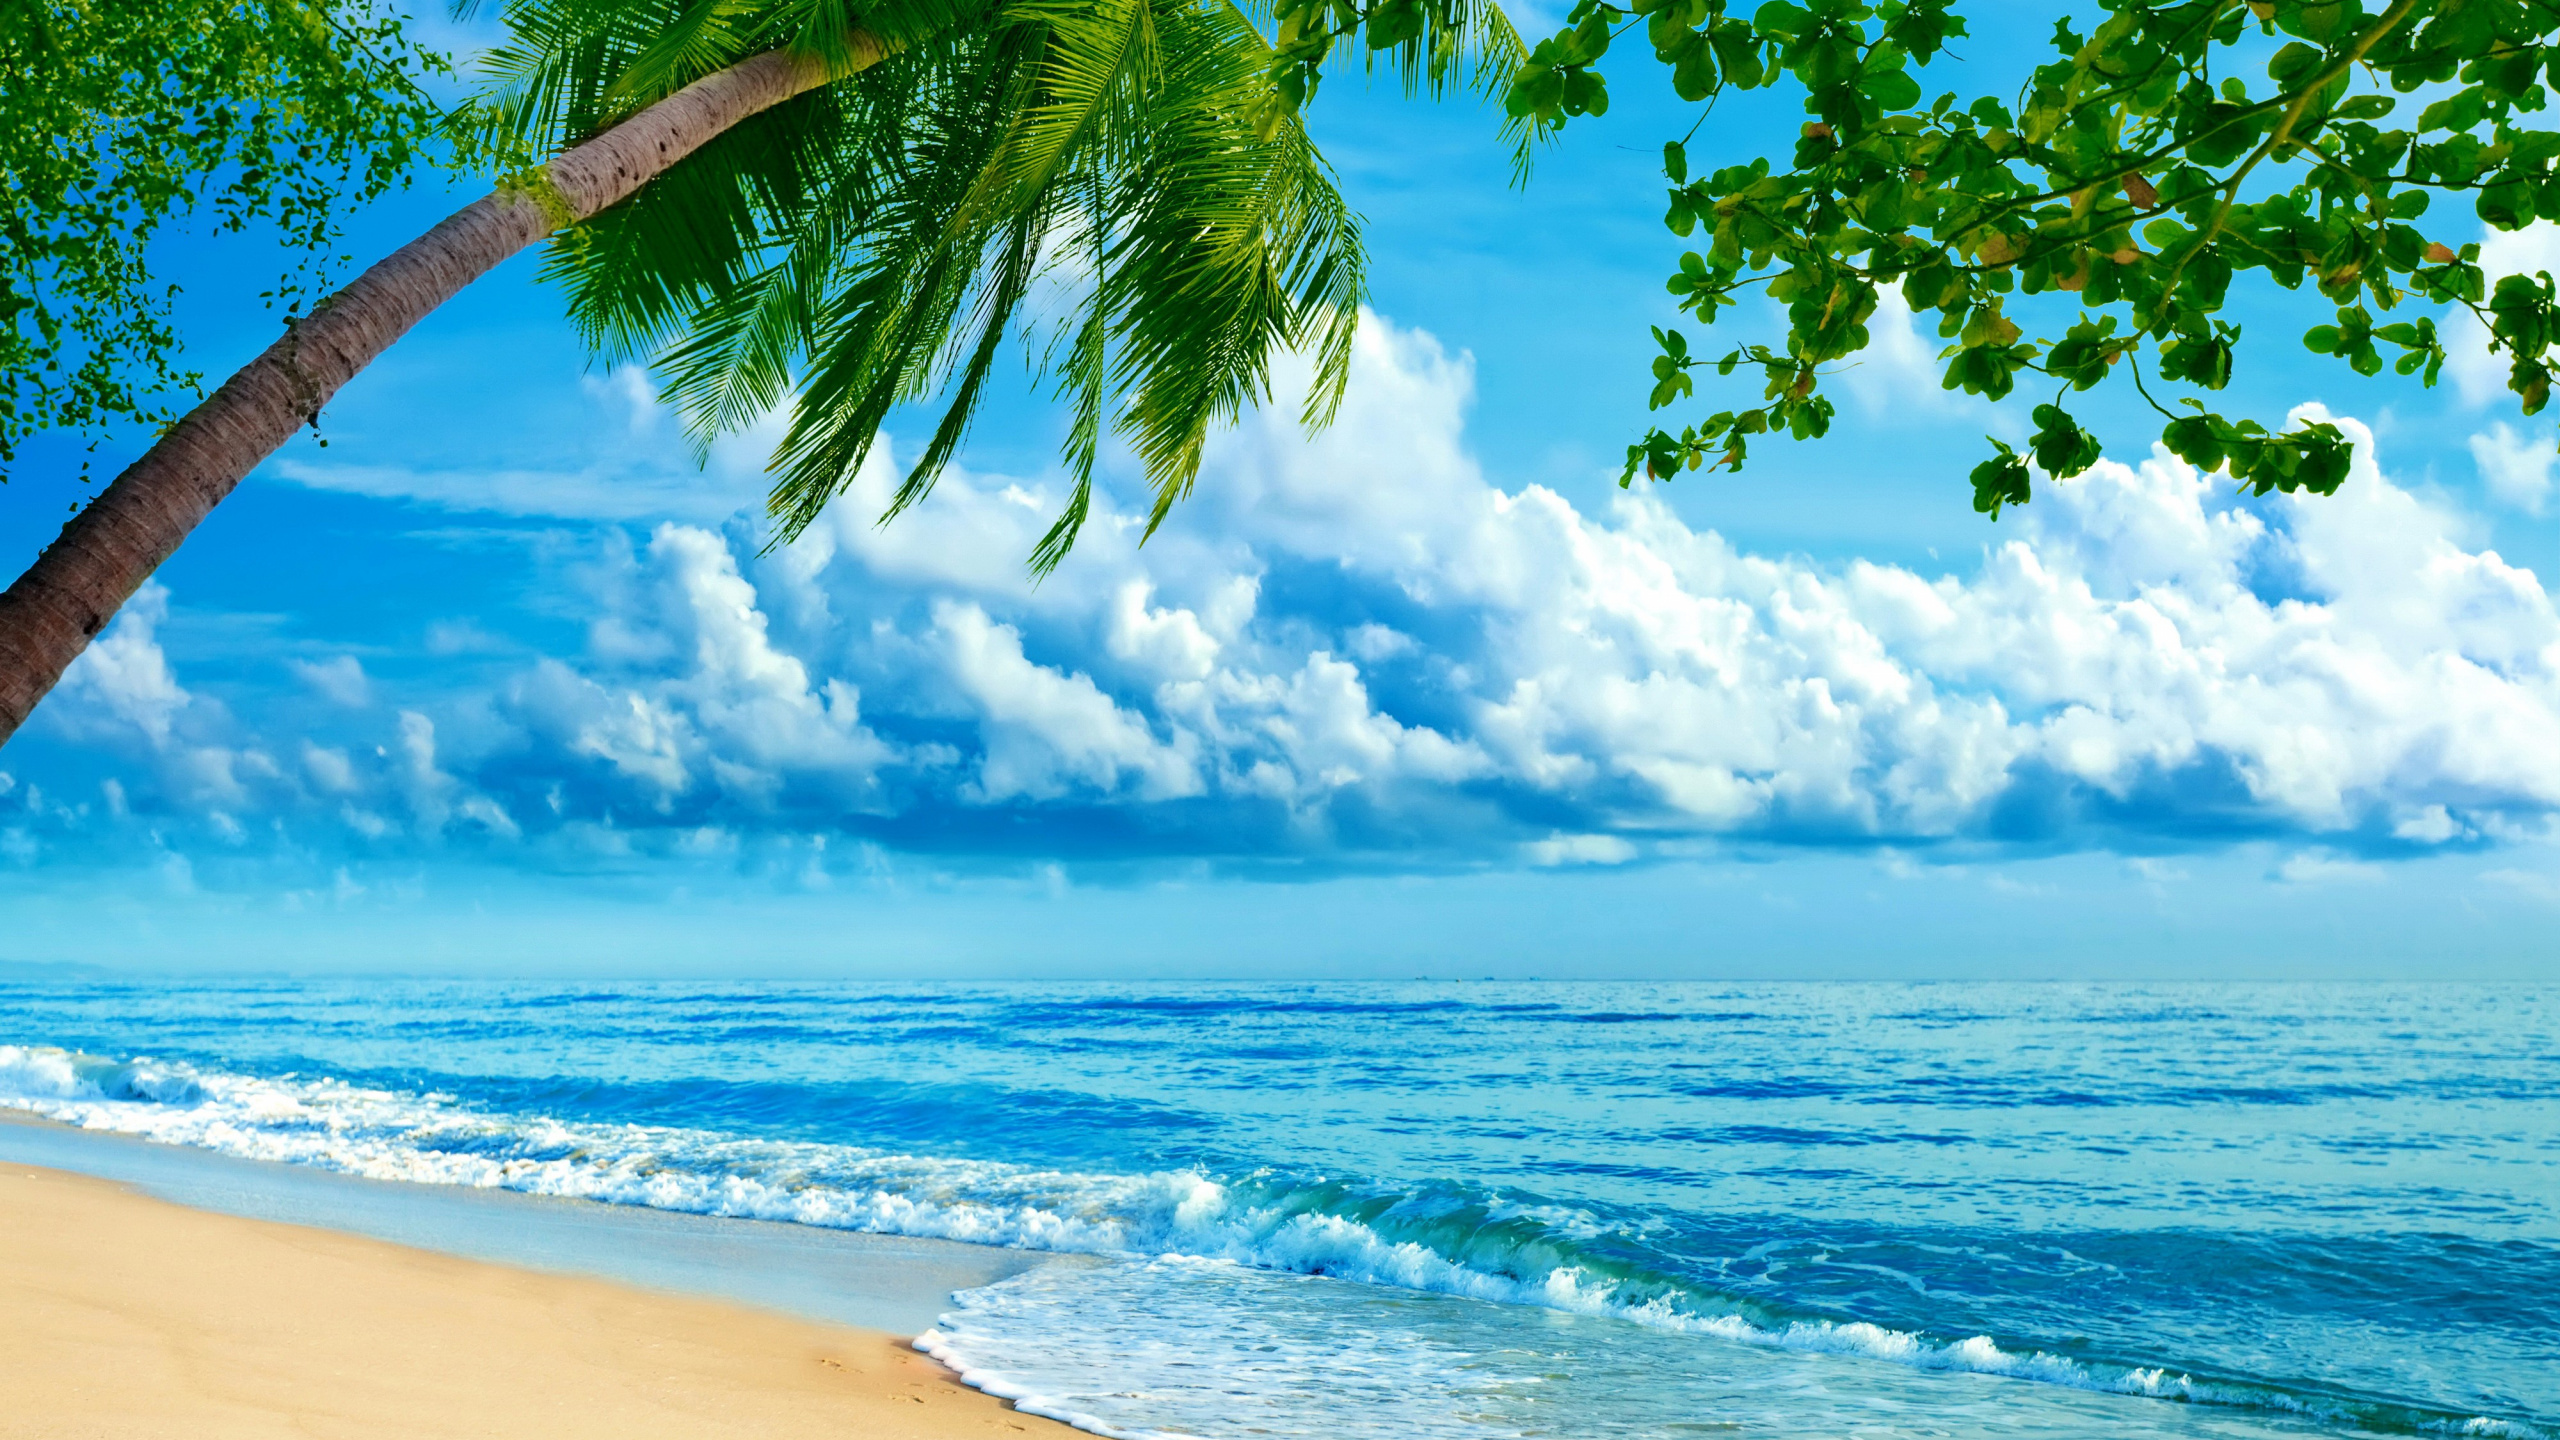 Palm Tree on Beach Shore During Daytime. Wallpaper in 2560x1440 Resolution